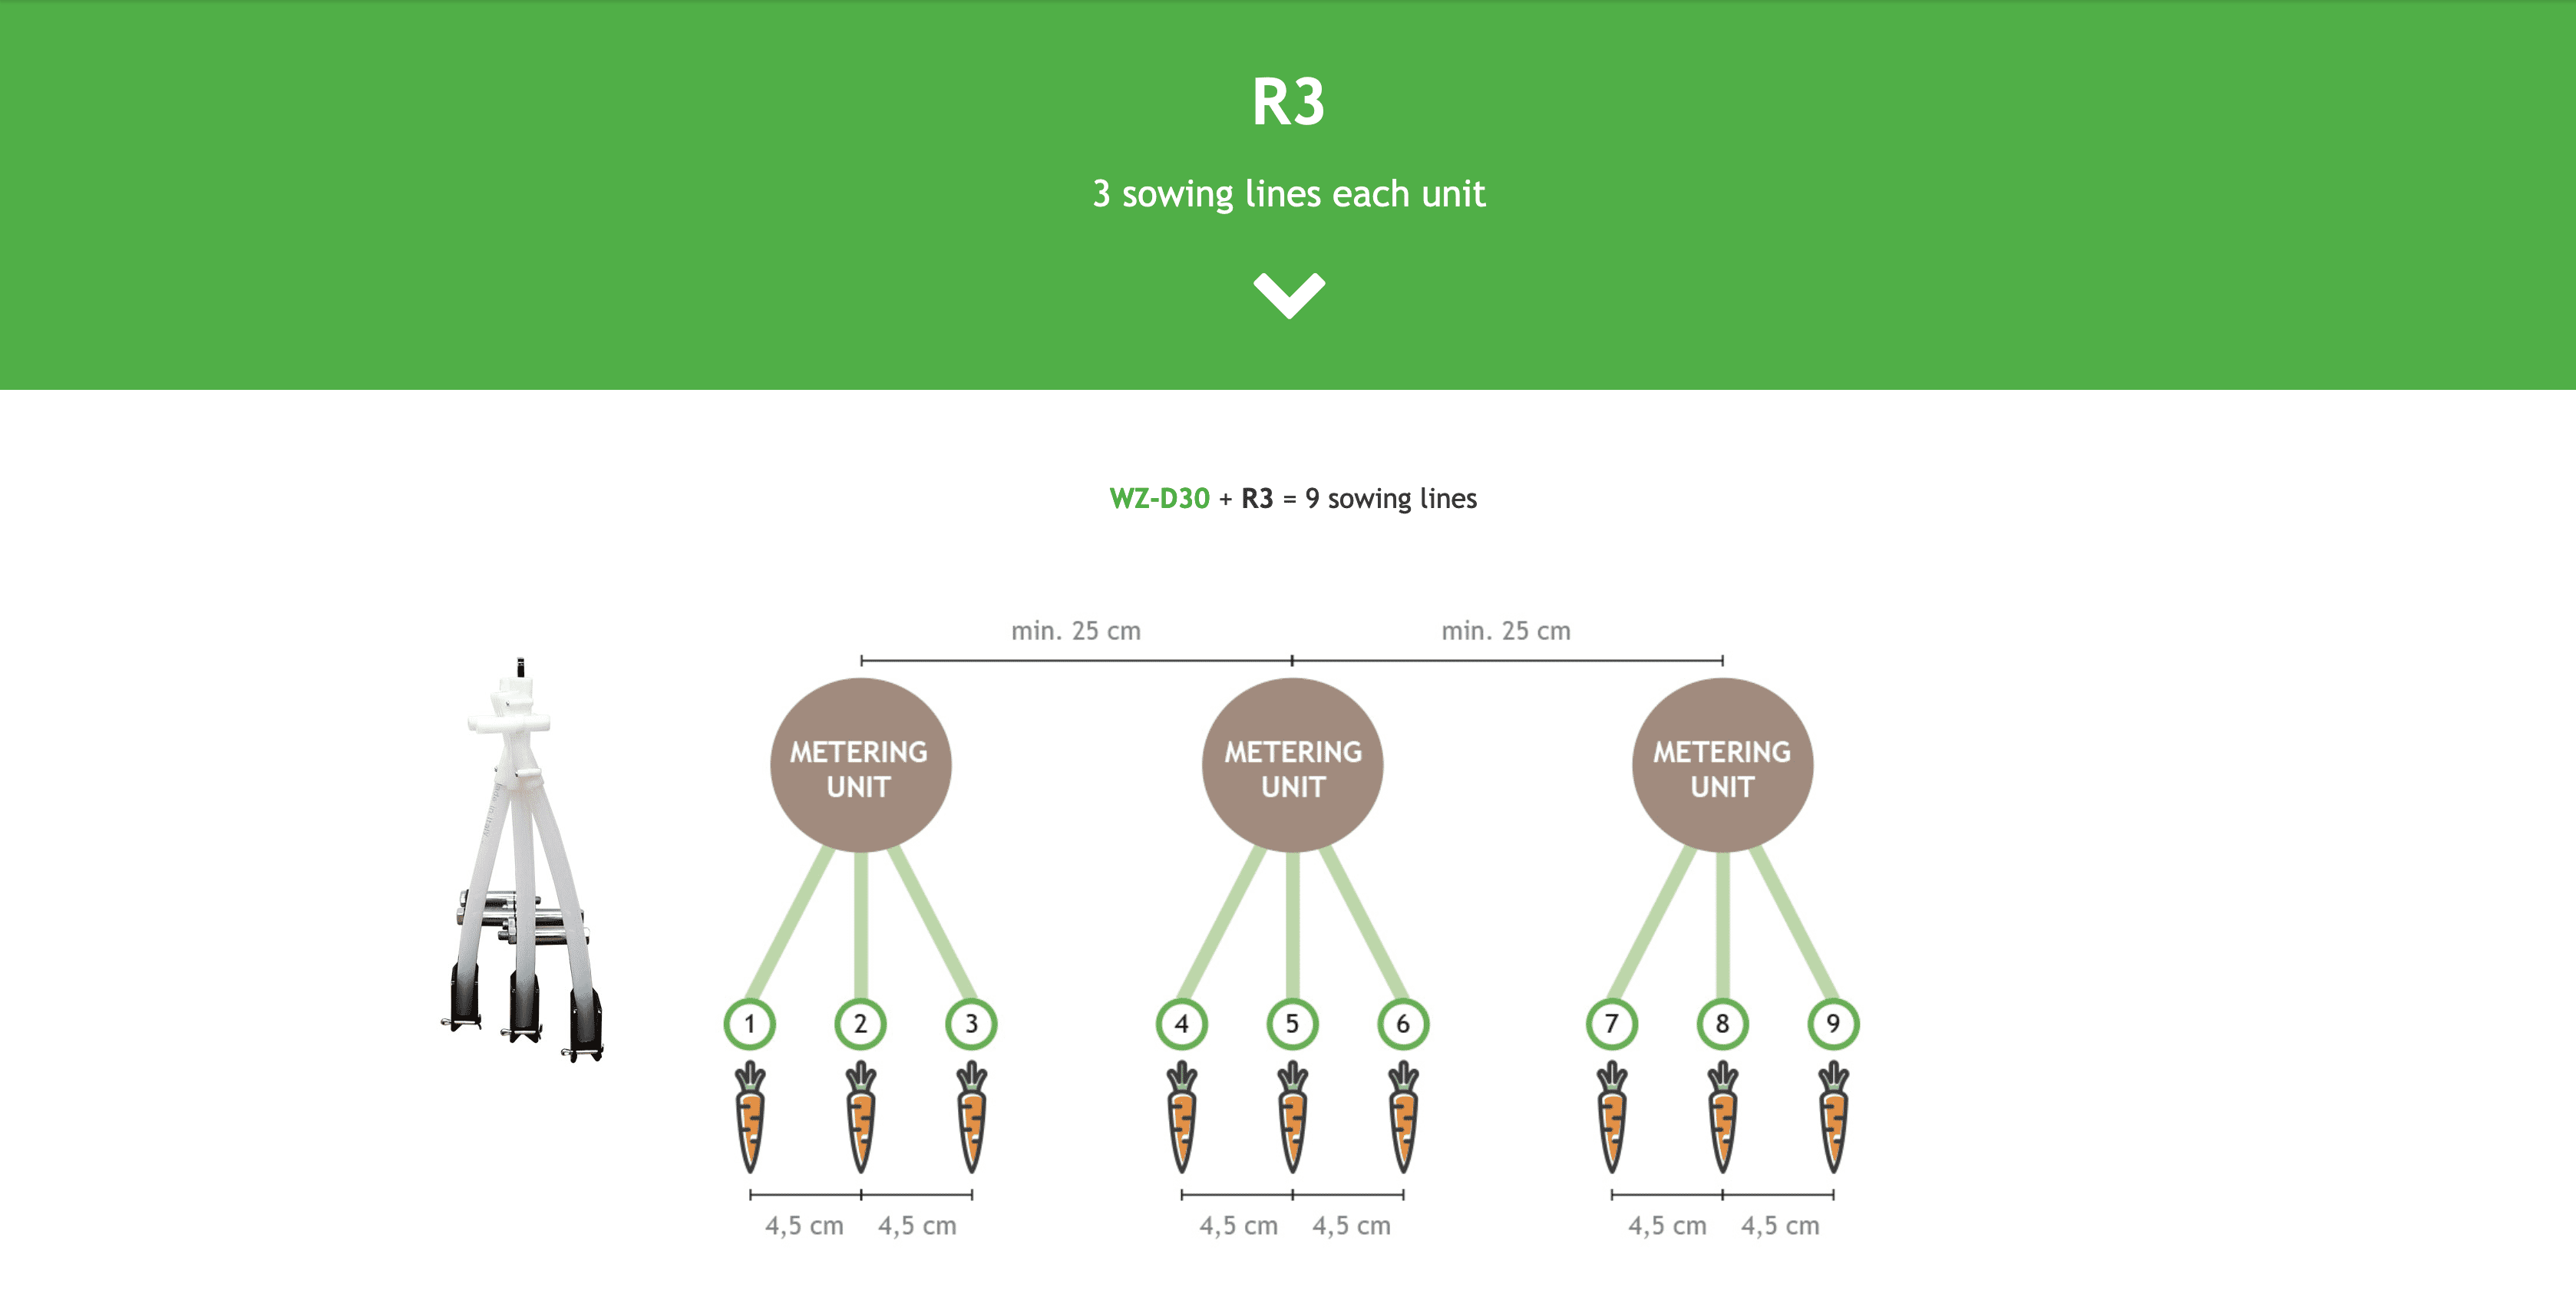 R3, Triple row per sowing unit